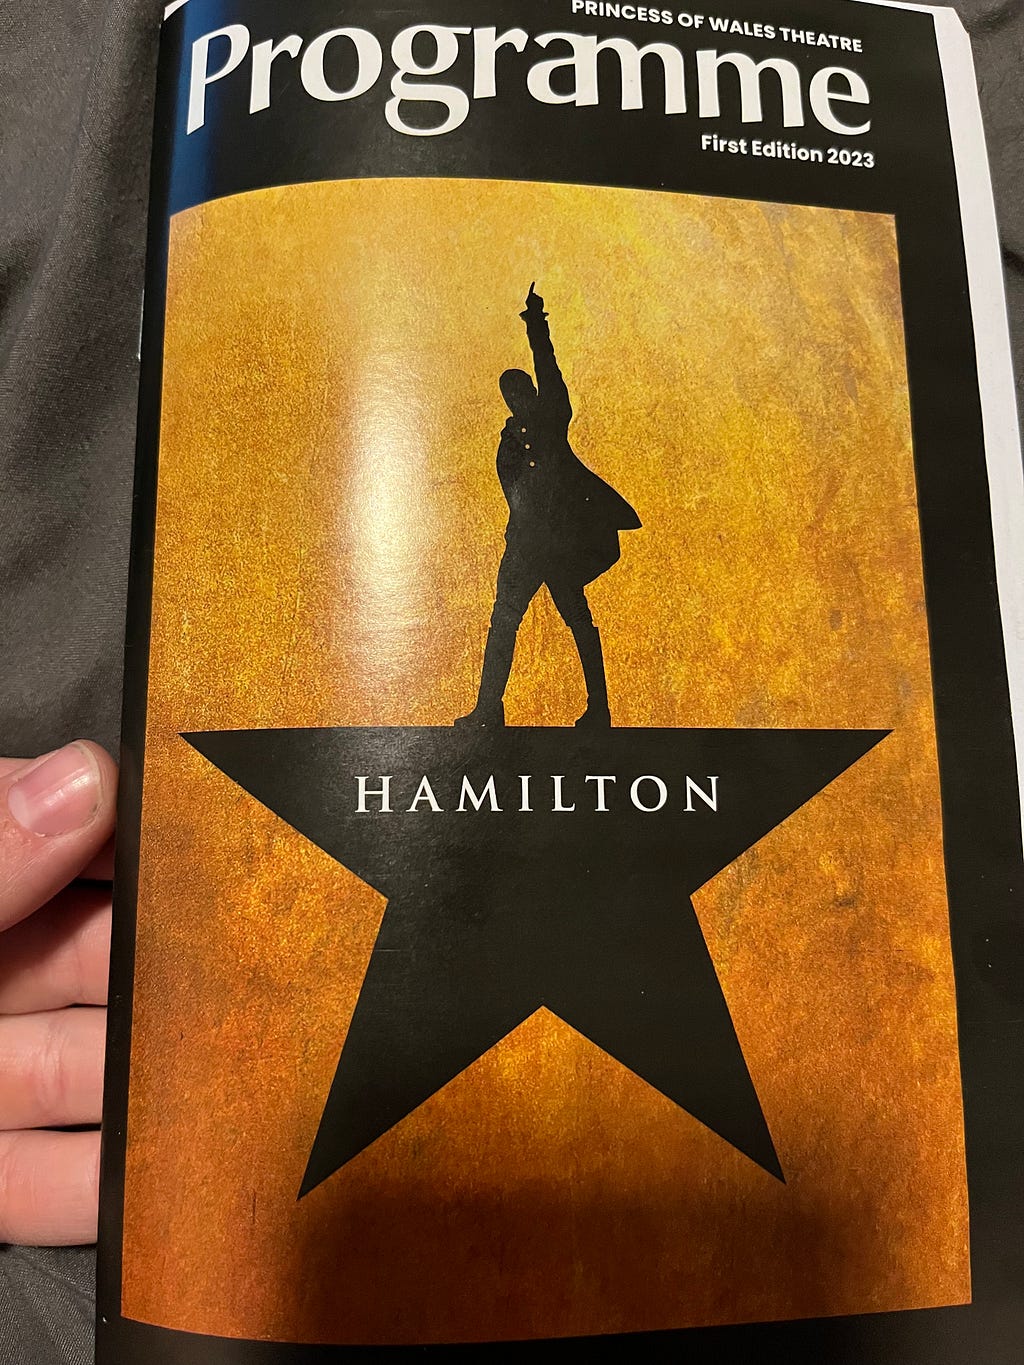 A Hamilton programme from the Princess of Wales Theatre in Toronto.